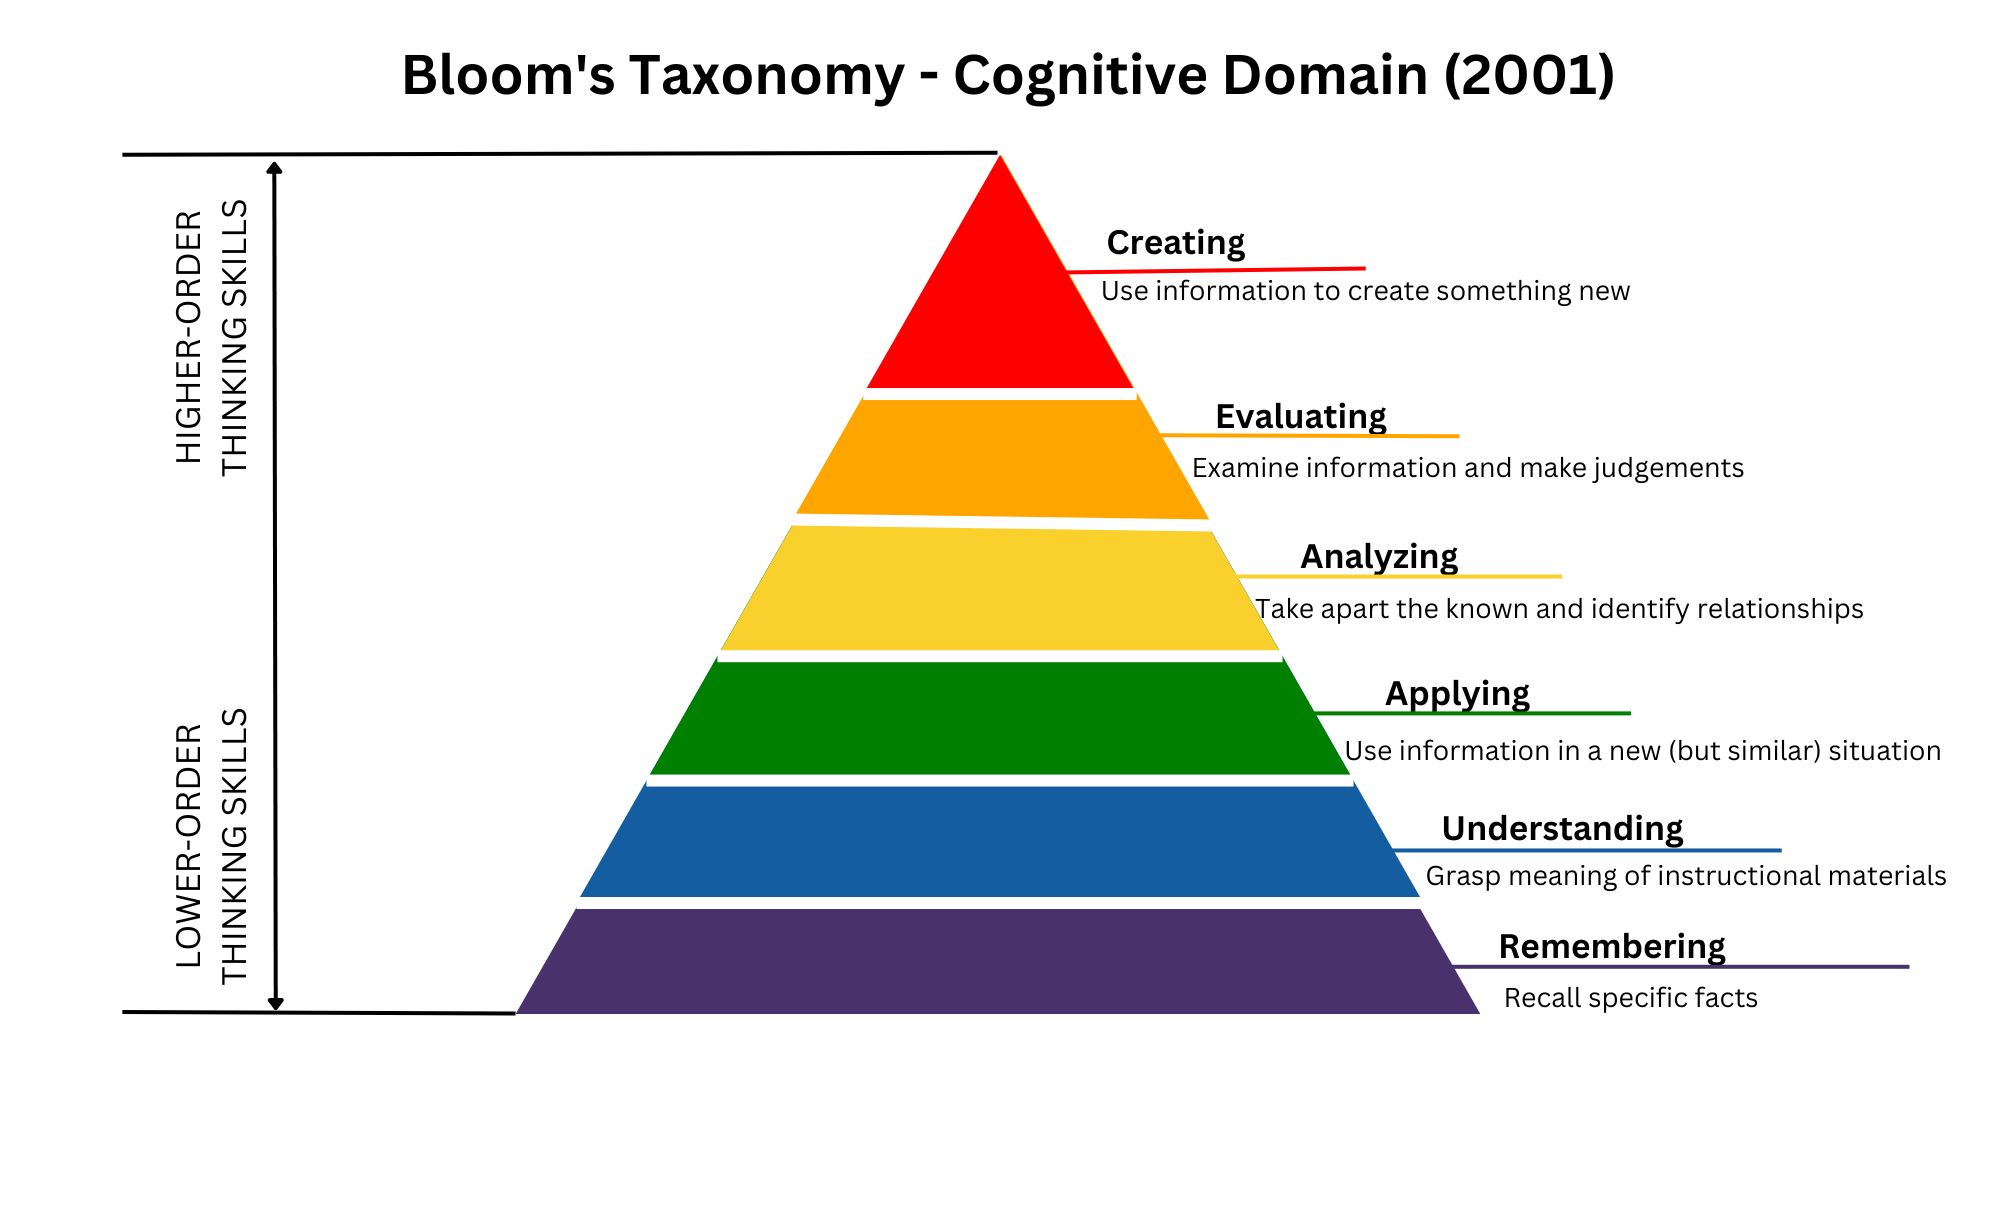 Bloom's Taxonomy cognitive domain (2001) triangle image. The base of the triangle represents lower order thinking skills and the higher up you go, the higher order thinking skills.